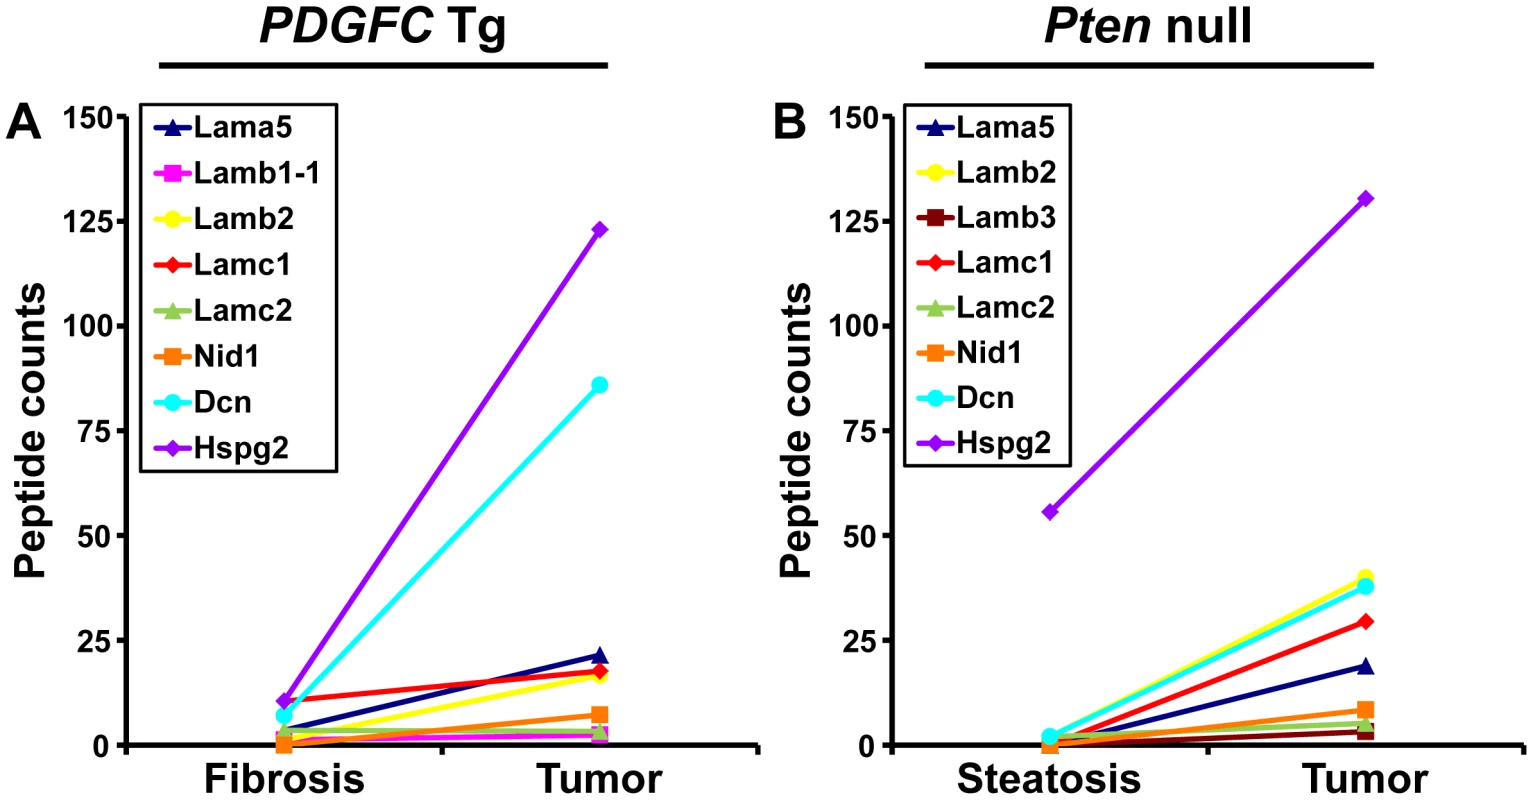 Non-collagenous ECM proteins up-regulated in <i>PDGFC</i> Tg and <i>Pten</i> null tumors.